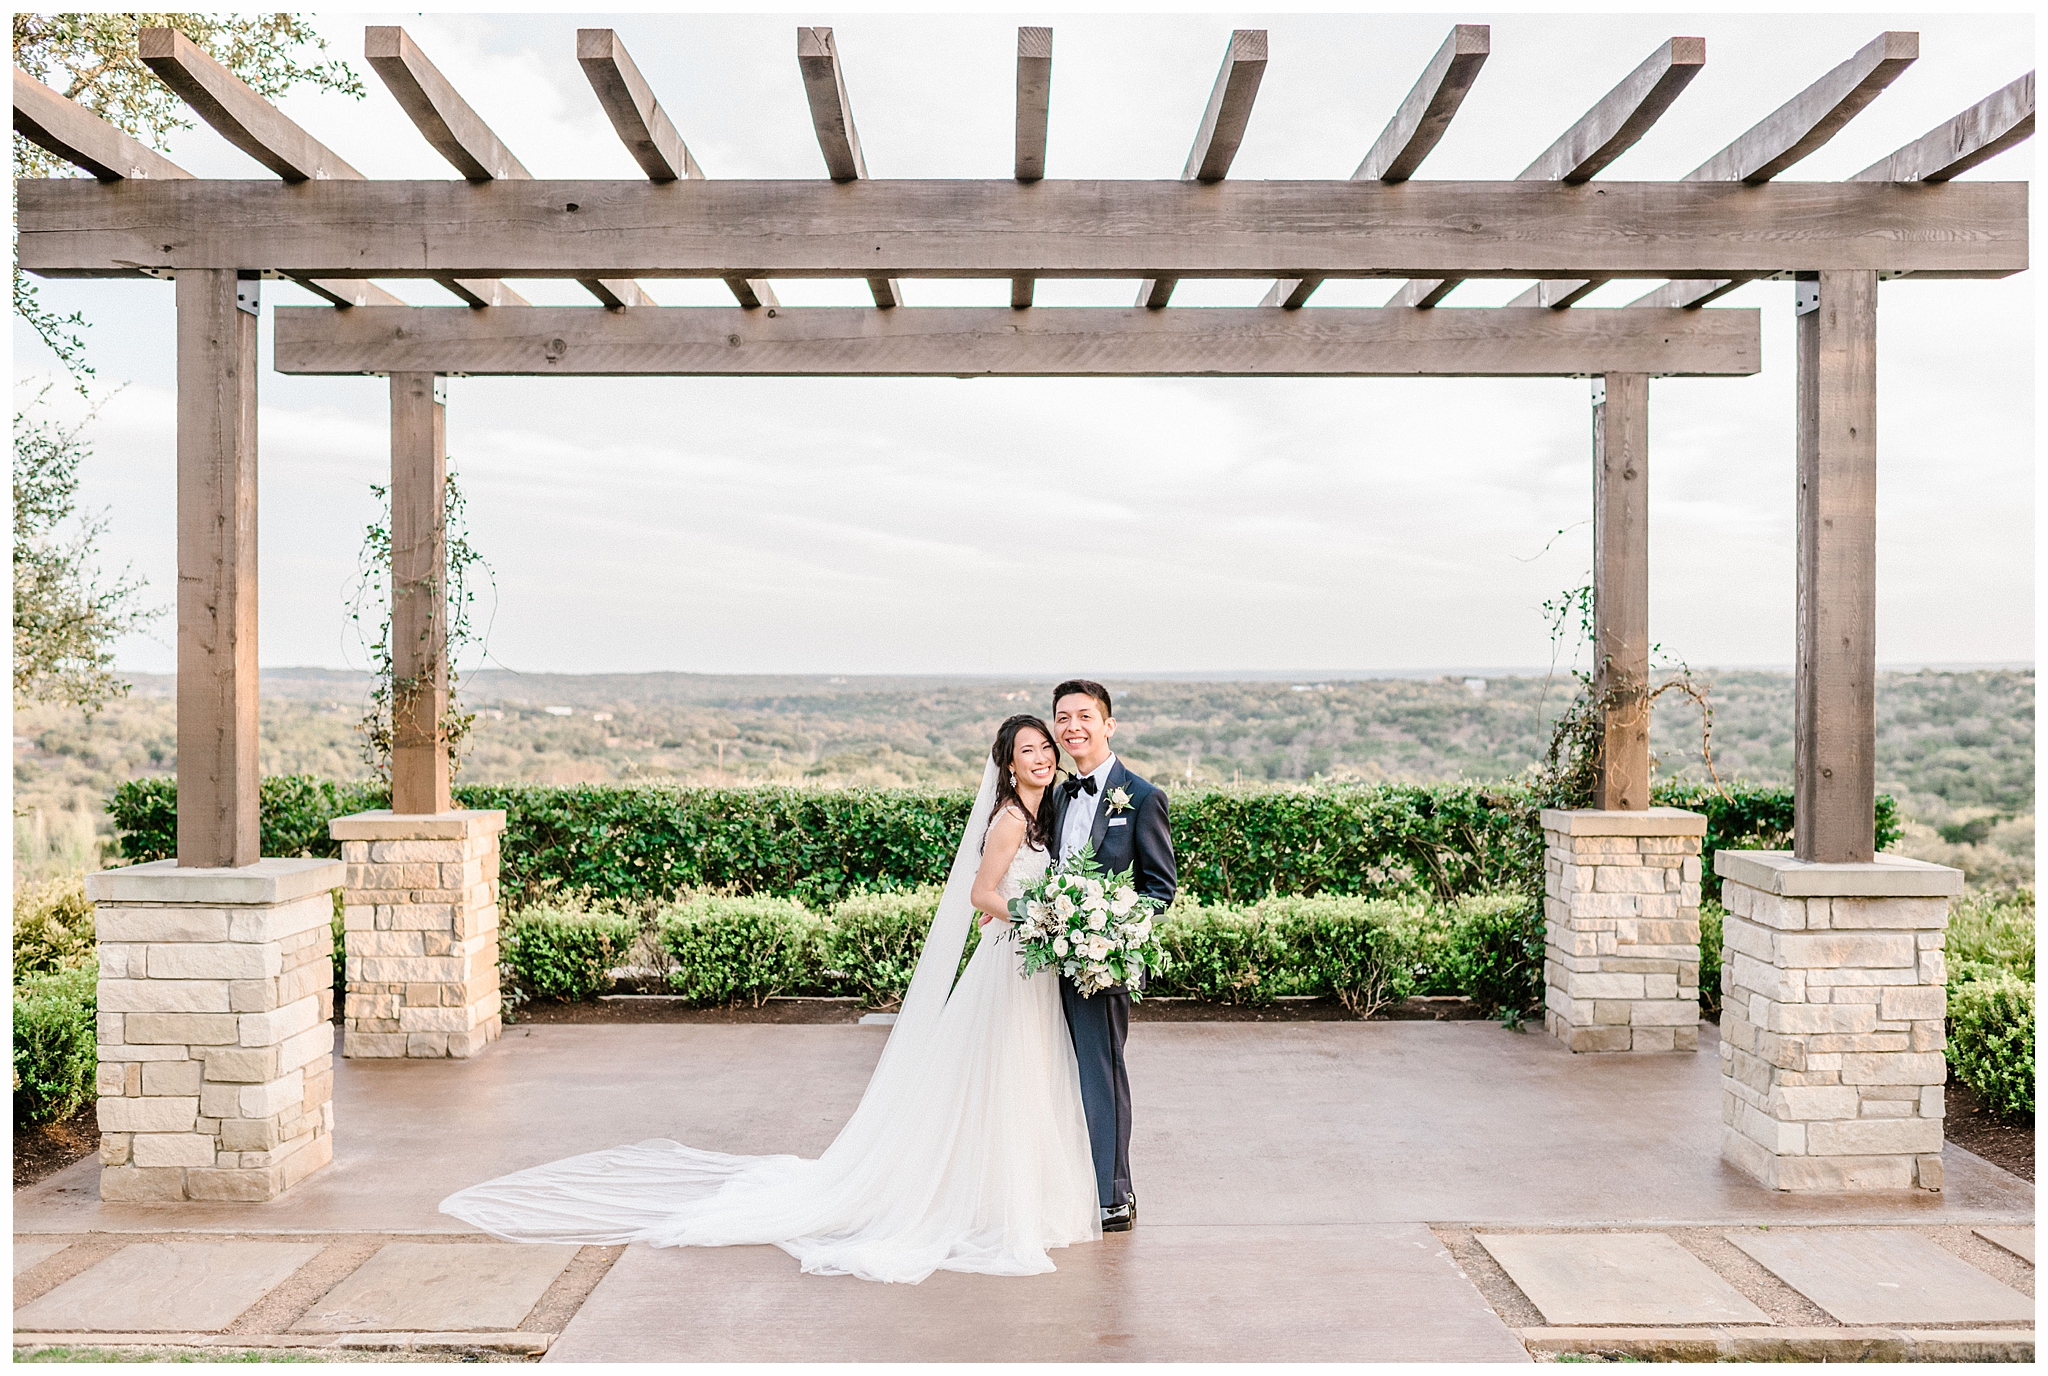 Sunset Portrait of Bride and Groom in Texas Hill Country